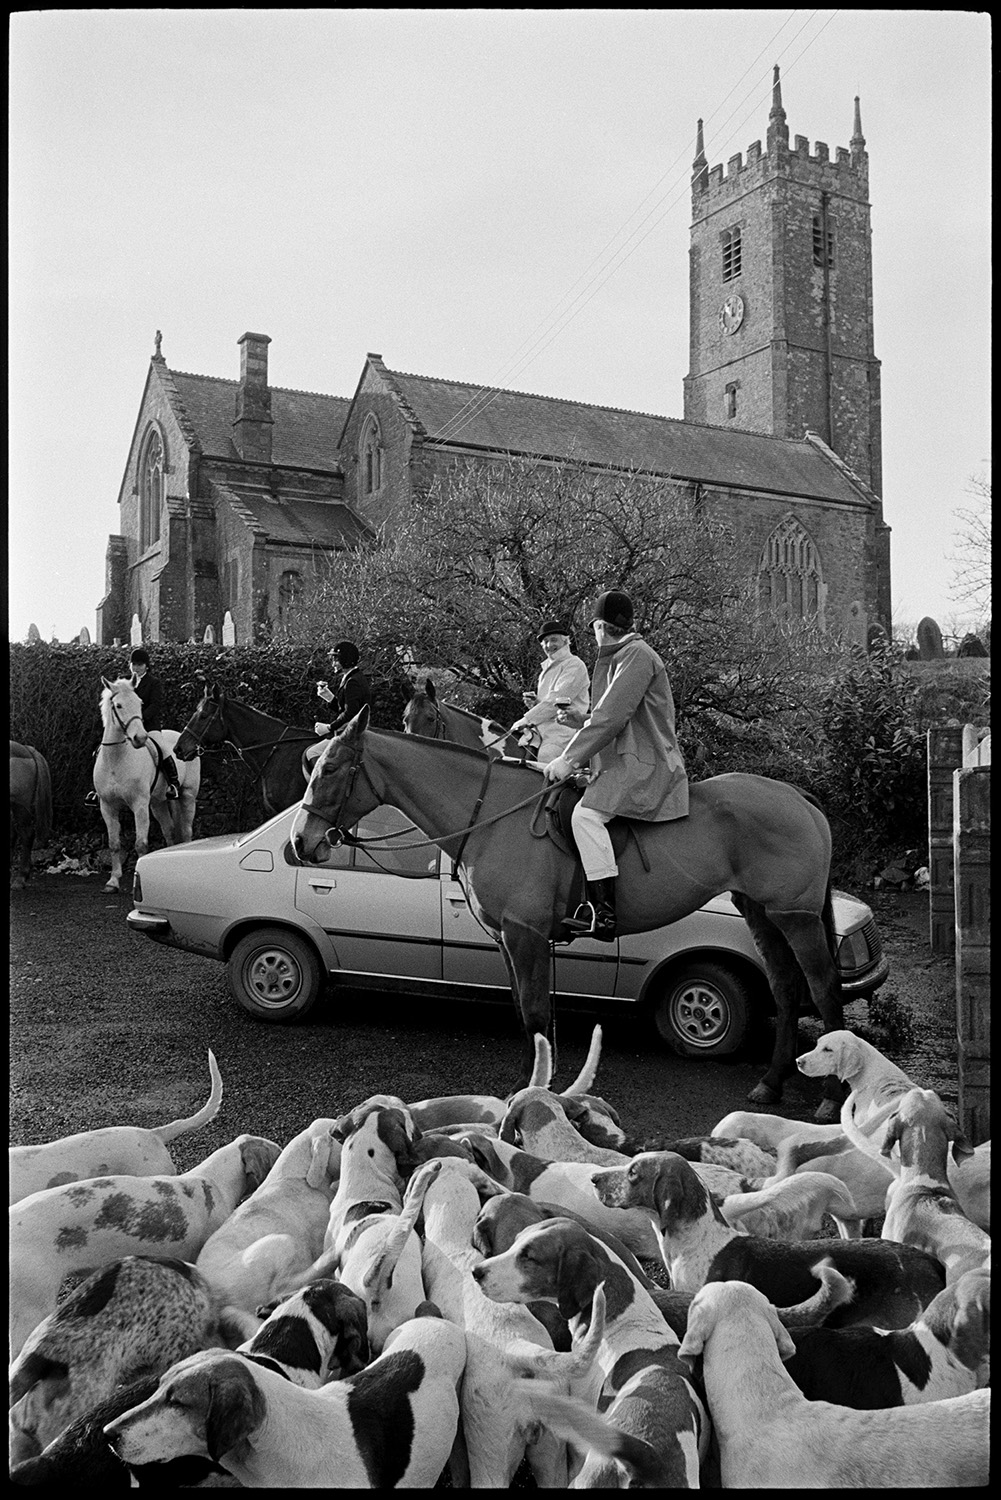 Hunt meet in village, setting off, horses and riders waiting in rain on lonely road. 
[A hunt meet by Petrockstowe Church. Huntsmen on horseback and hounds are gathered by a parked car outside the church.]